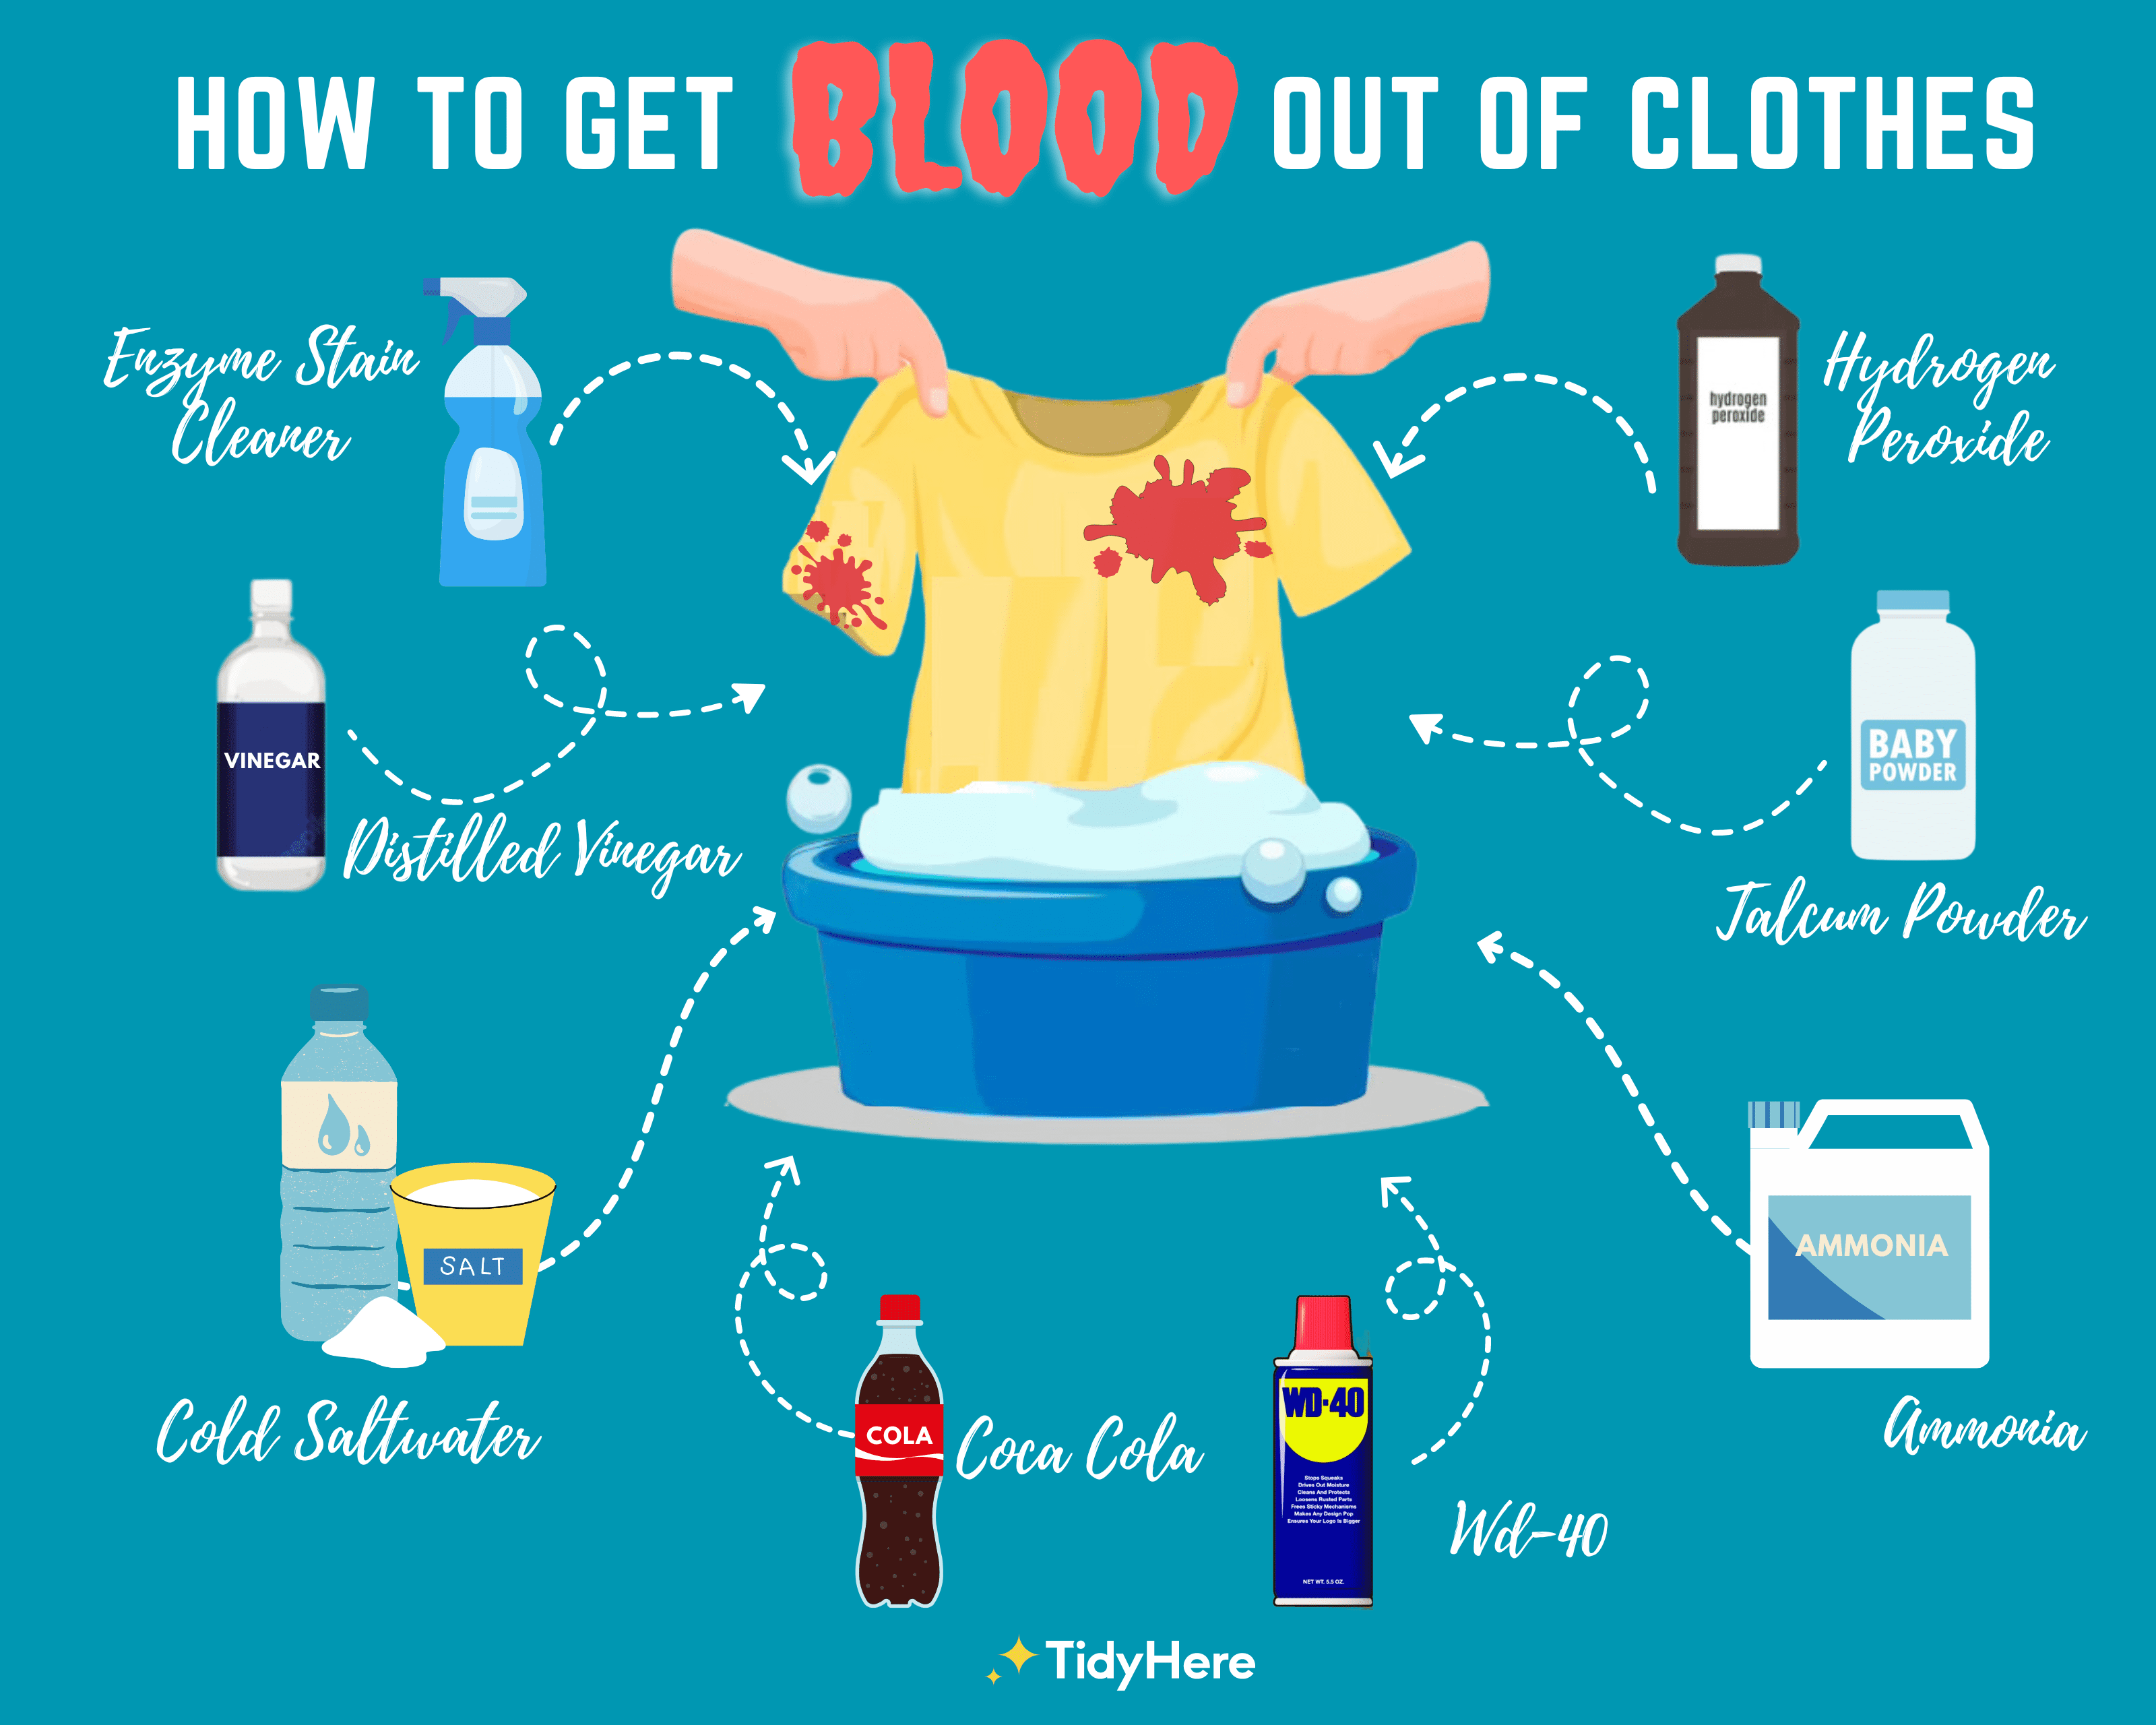 How To Get Blood Out of Clothes Infographic